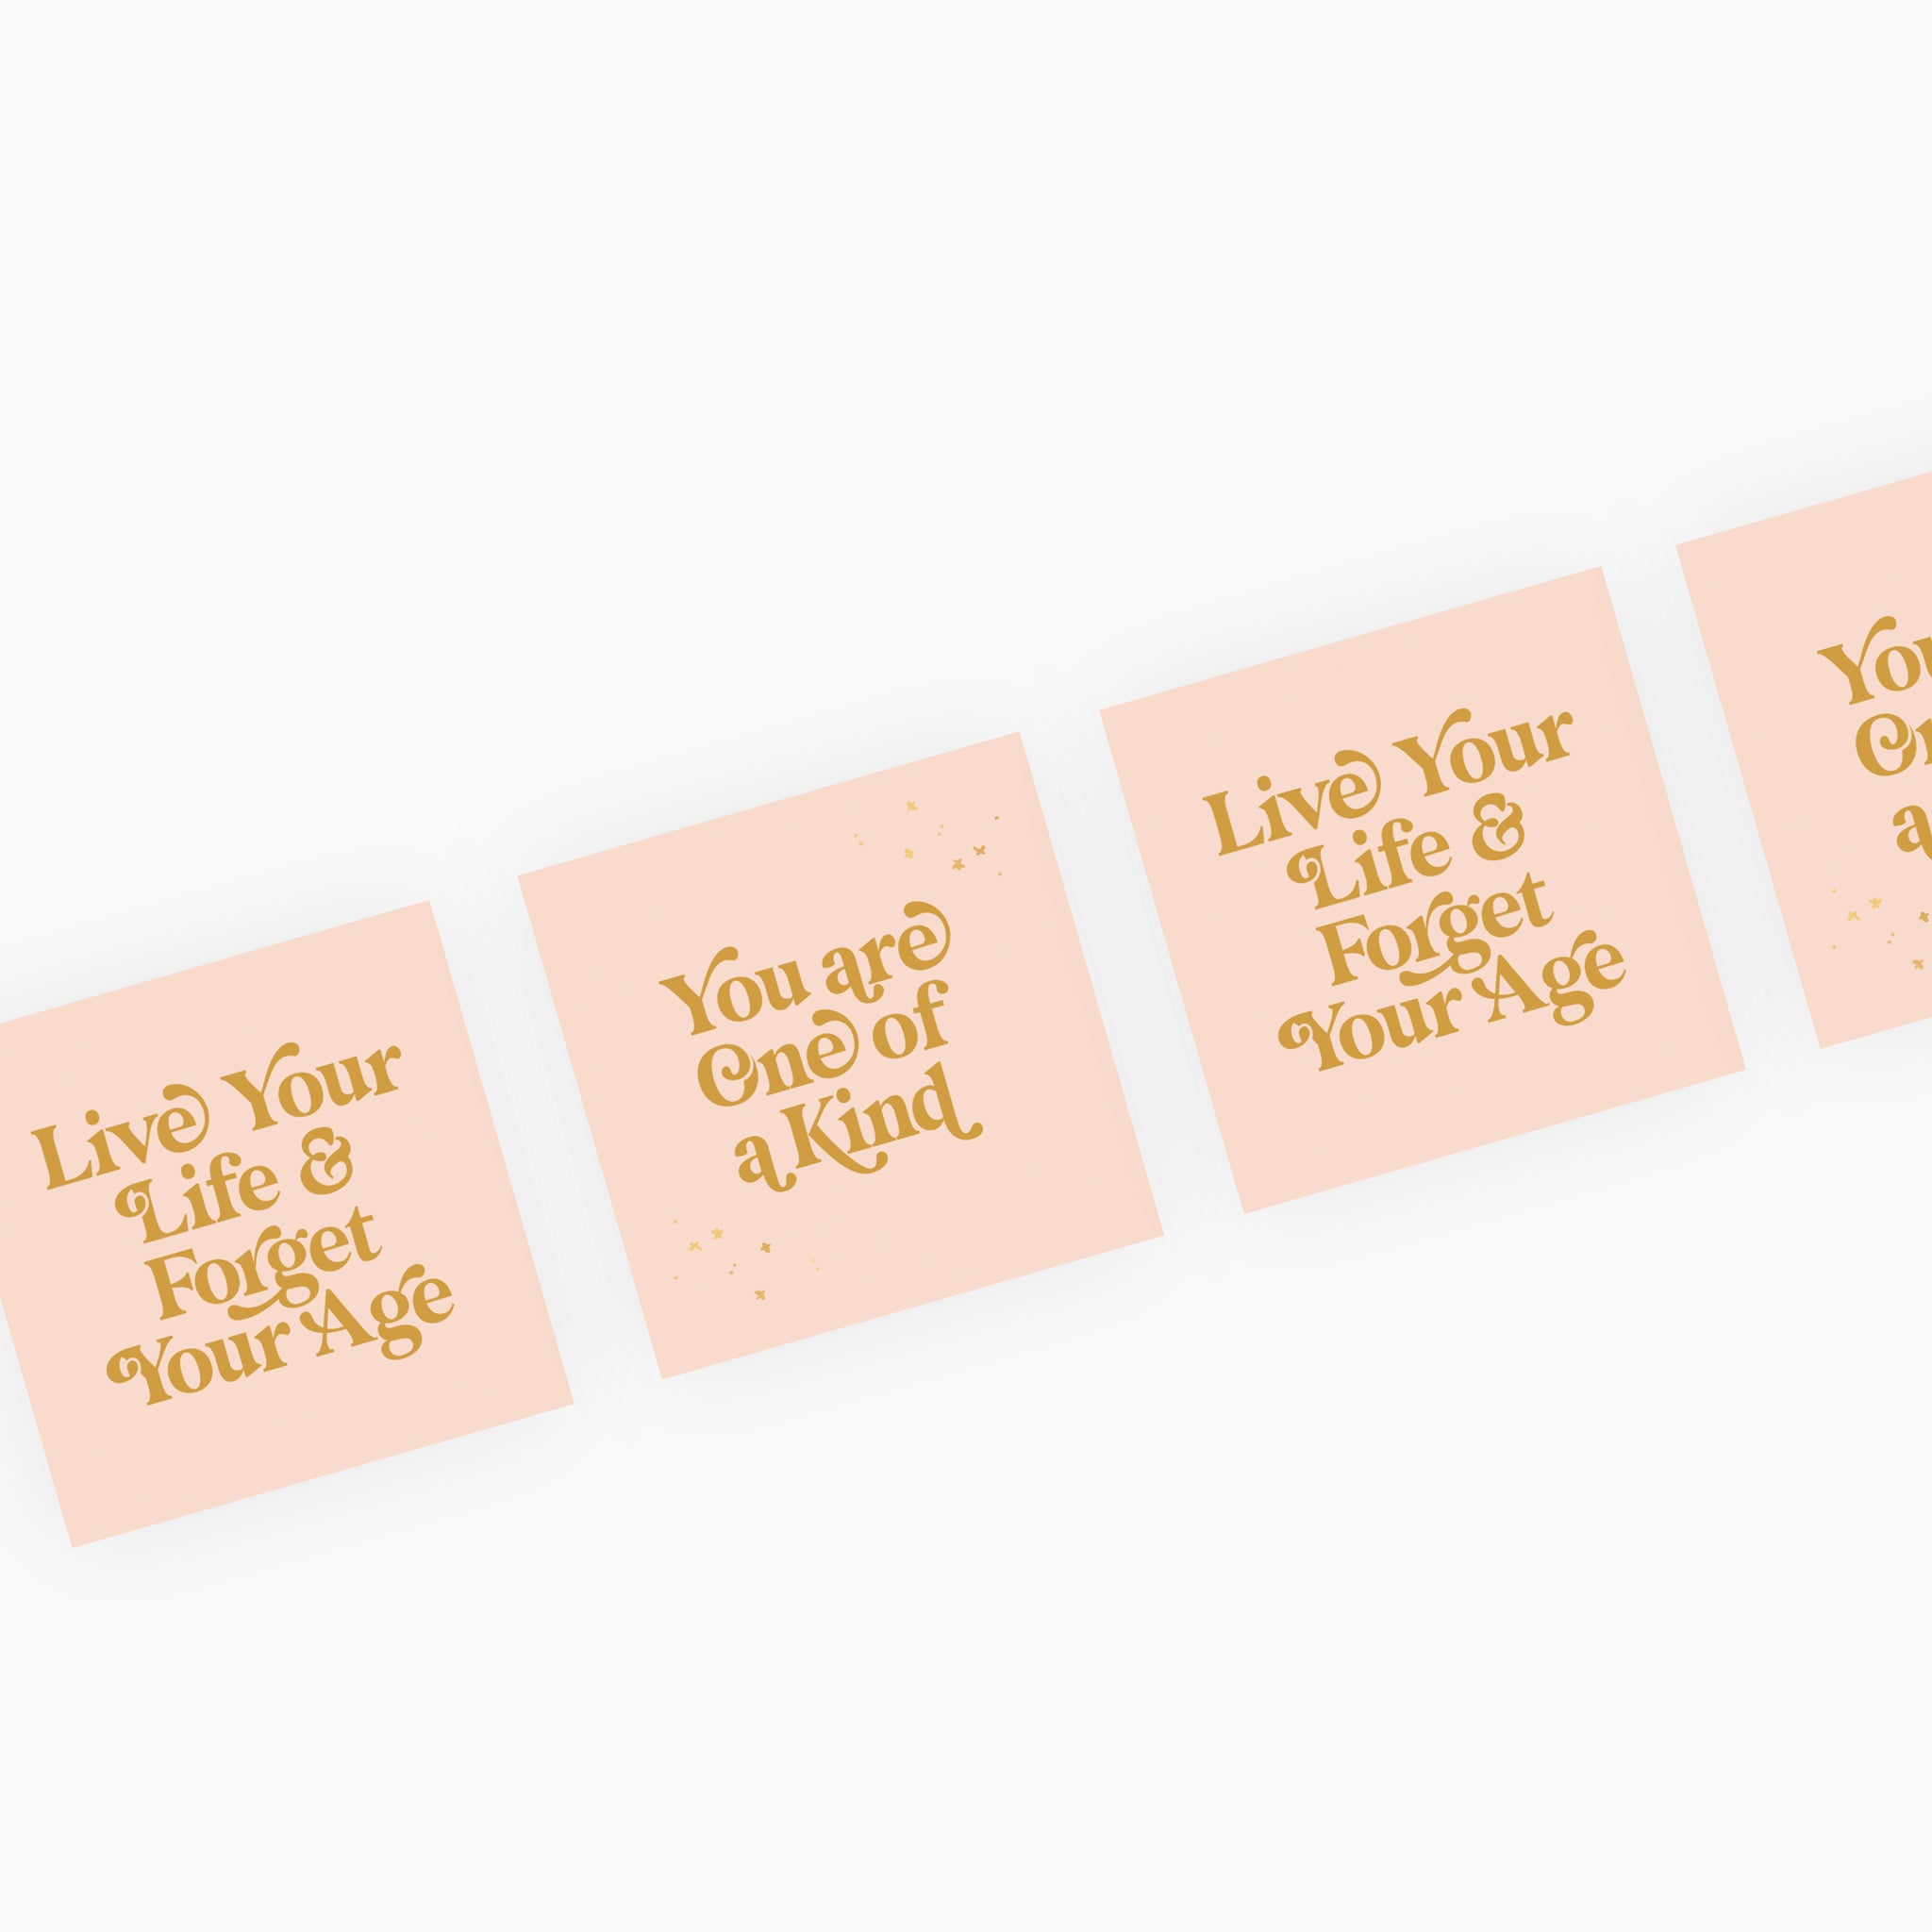 You Are One of a Kind Double-Sided Match Box